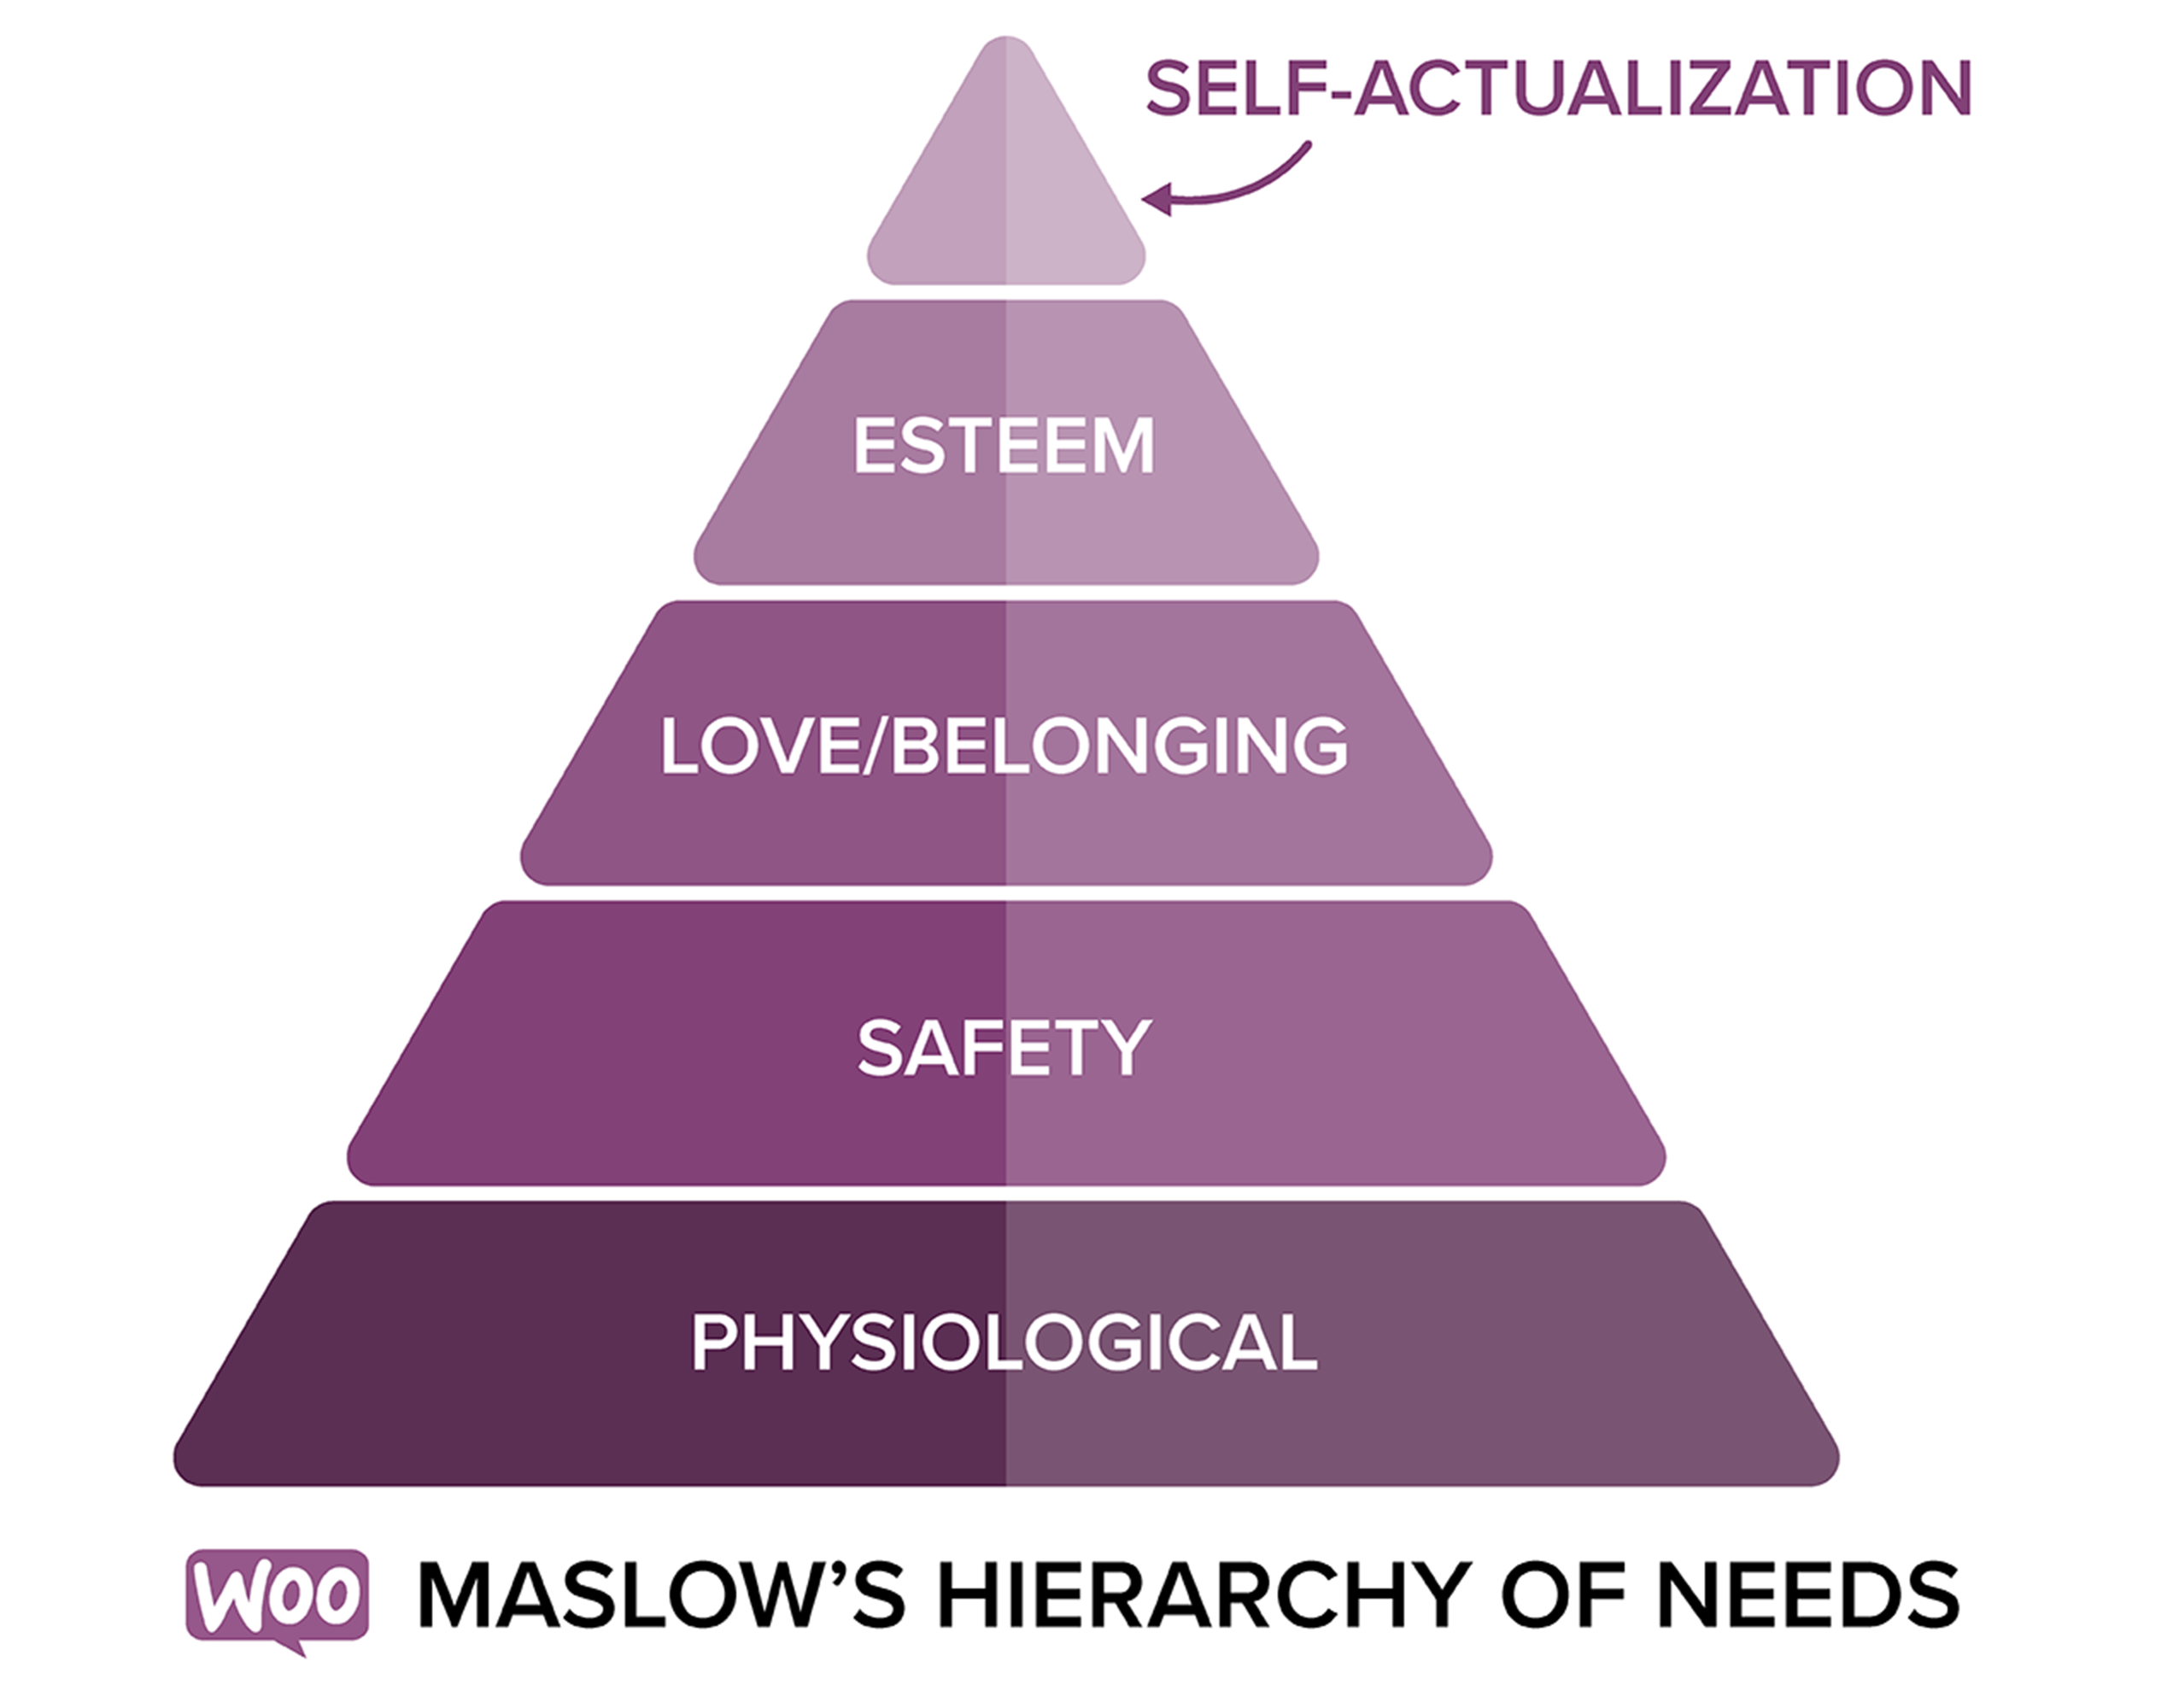 Maslow's Hierarchy of Needs, which outlines the needs of your customers.